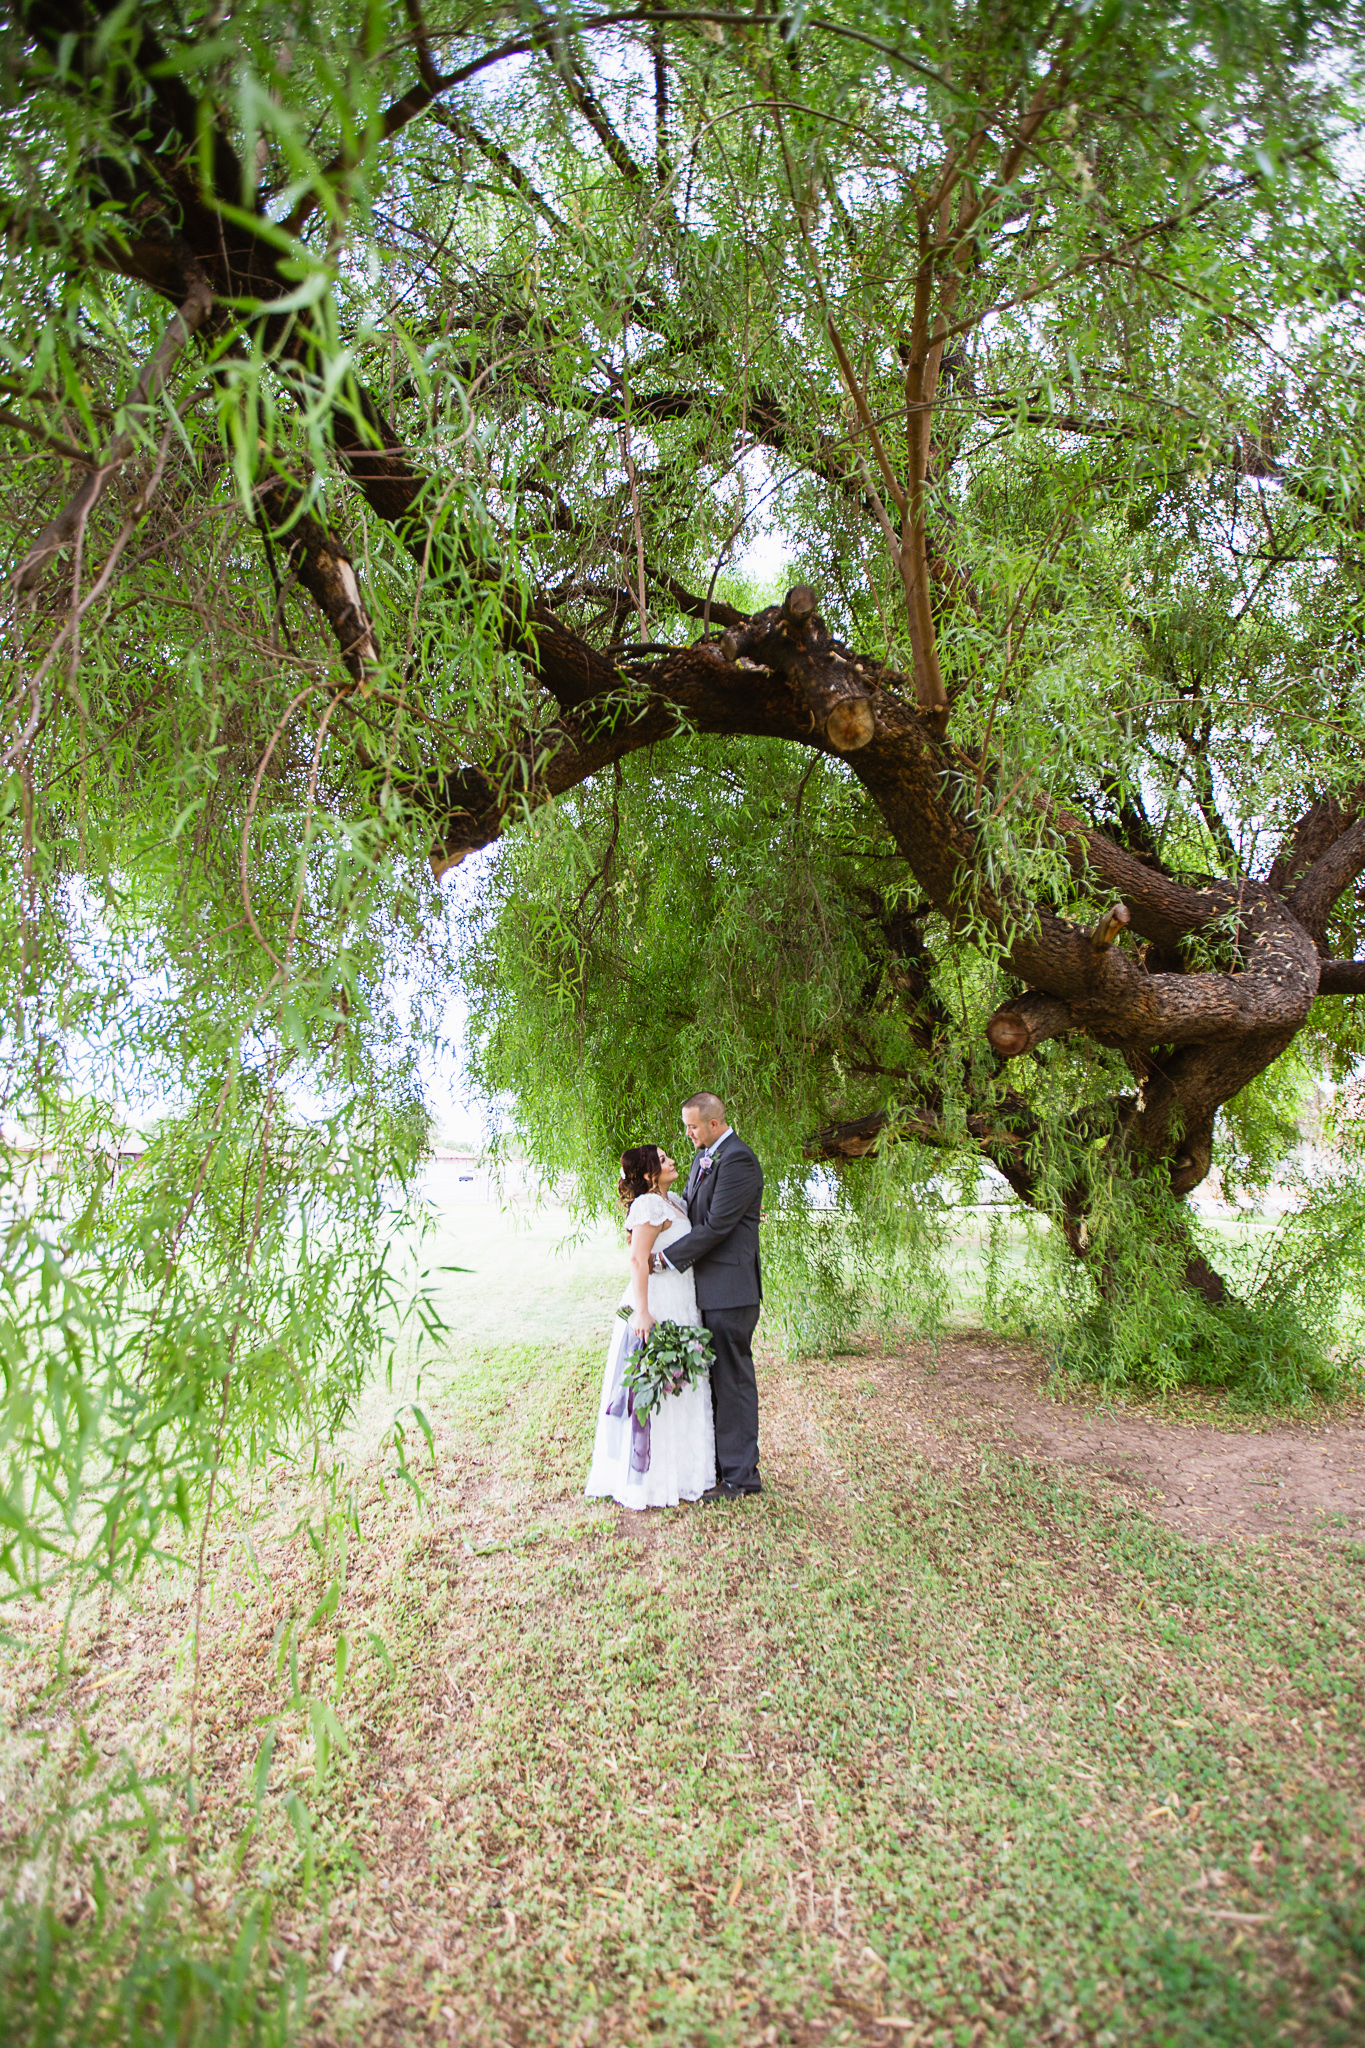 Bride and groom share an intimate moment entwined in a tree by Phoenix wedding photographer PMA Photography.